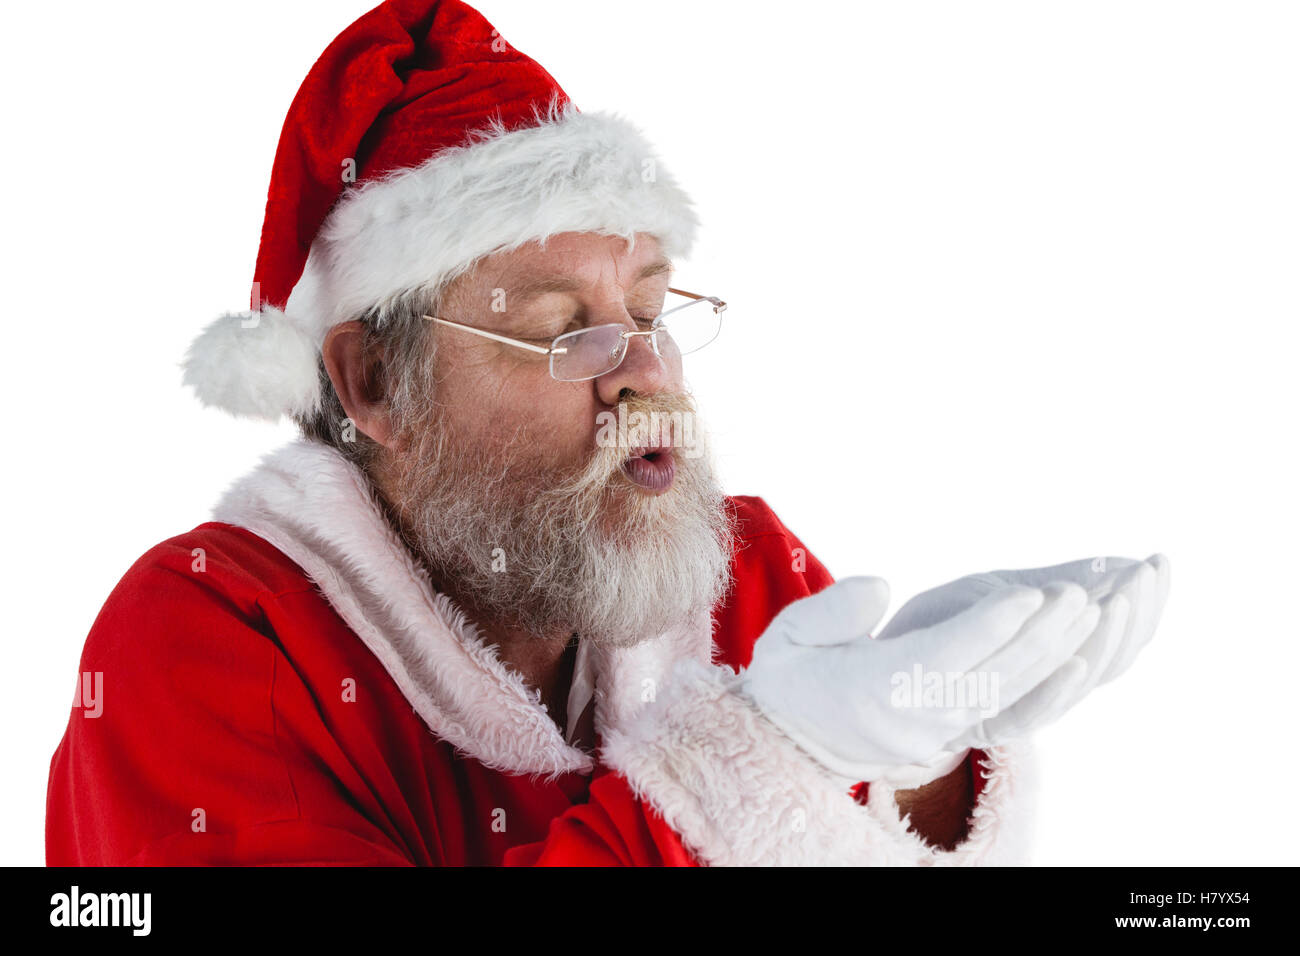 Santa claus in eyeglasses blowing invisible snow Stock Photo